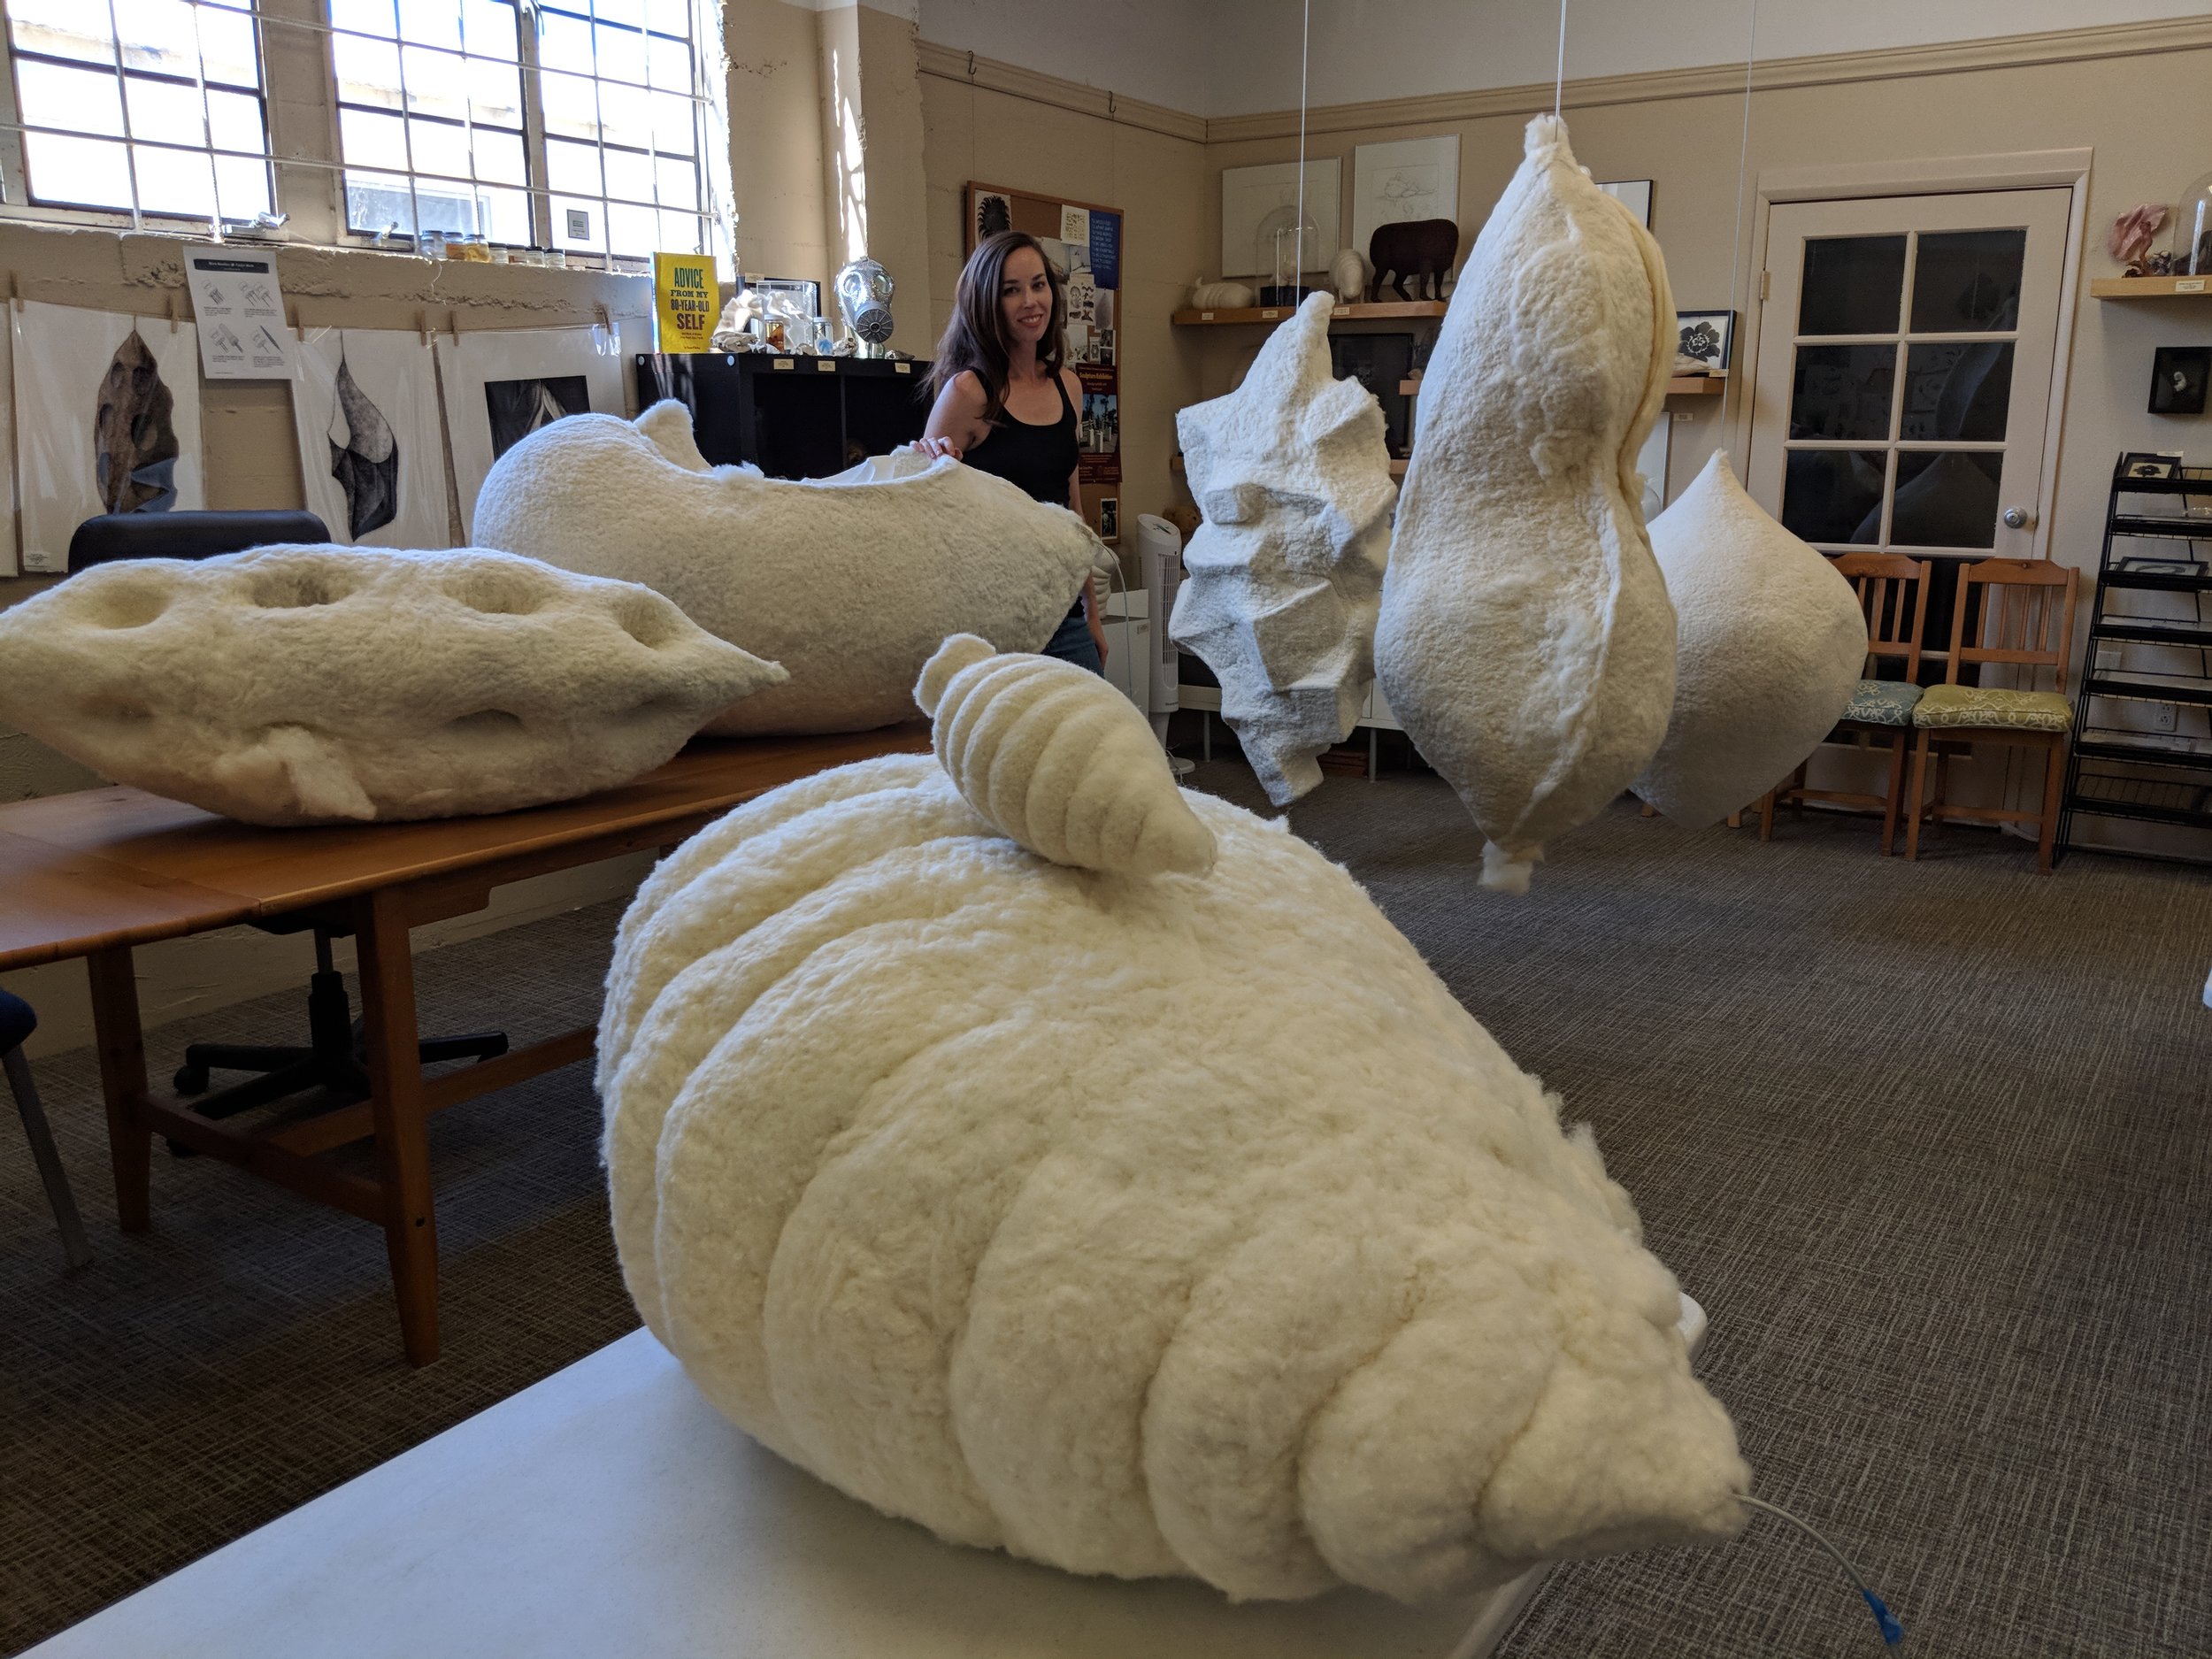 Foam: It's Complicated- using styrofoam in sculpture with a conscience —  Stephanie Metz